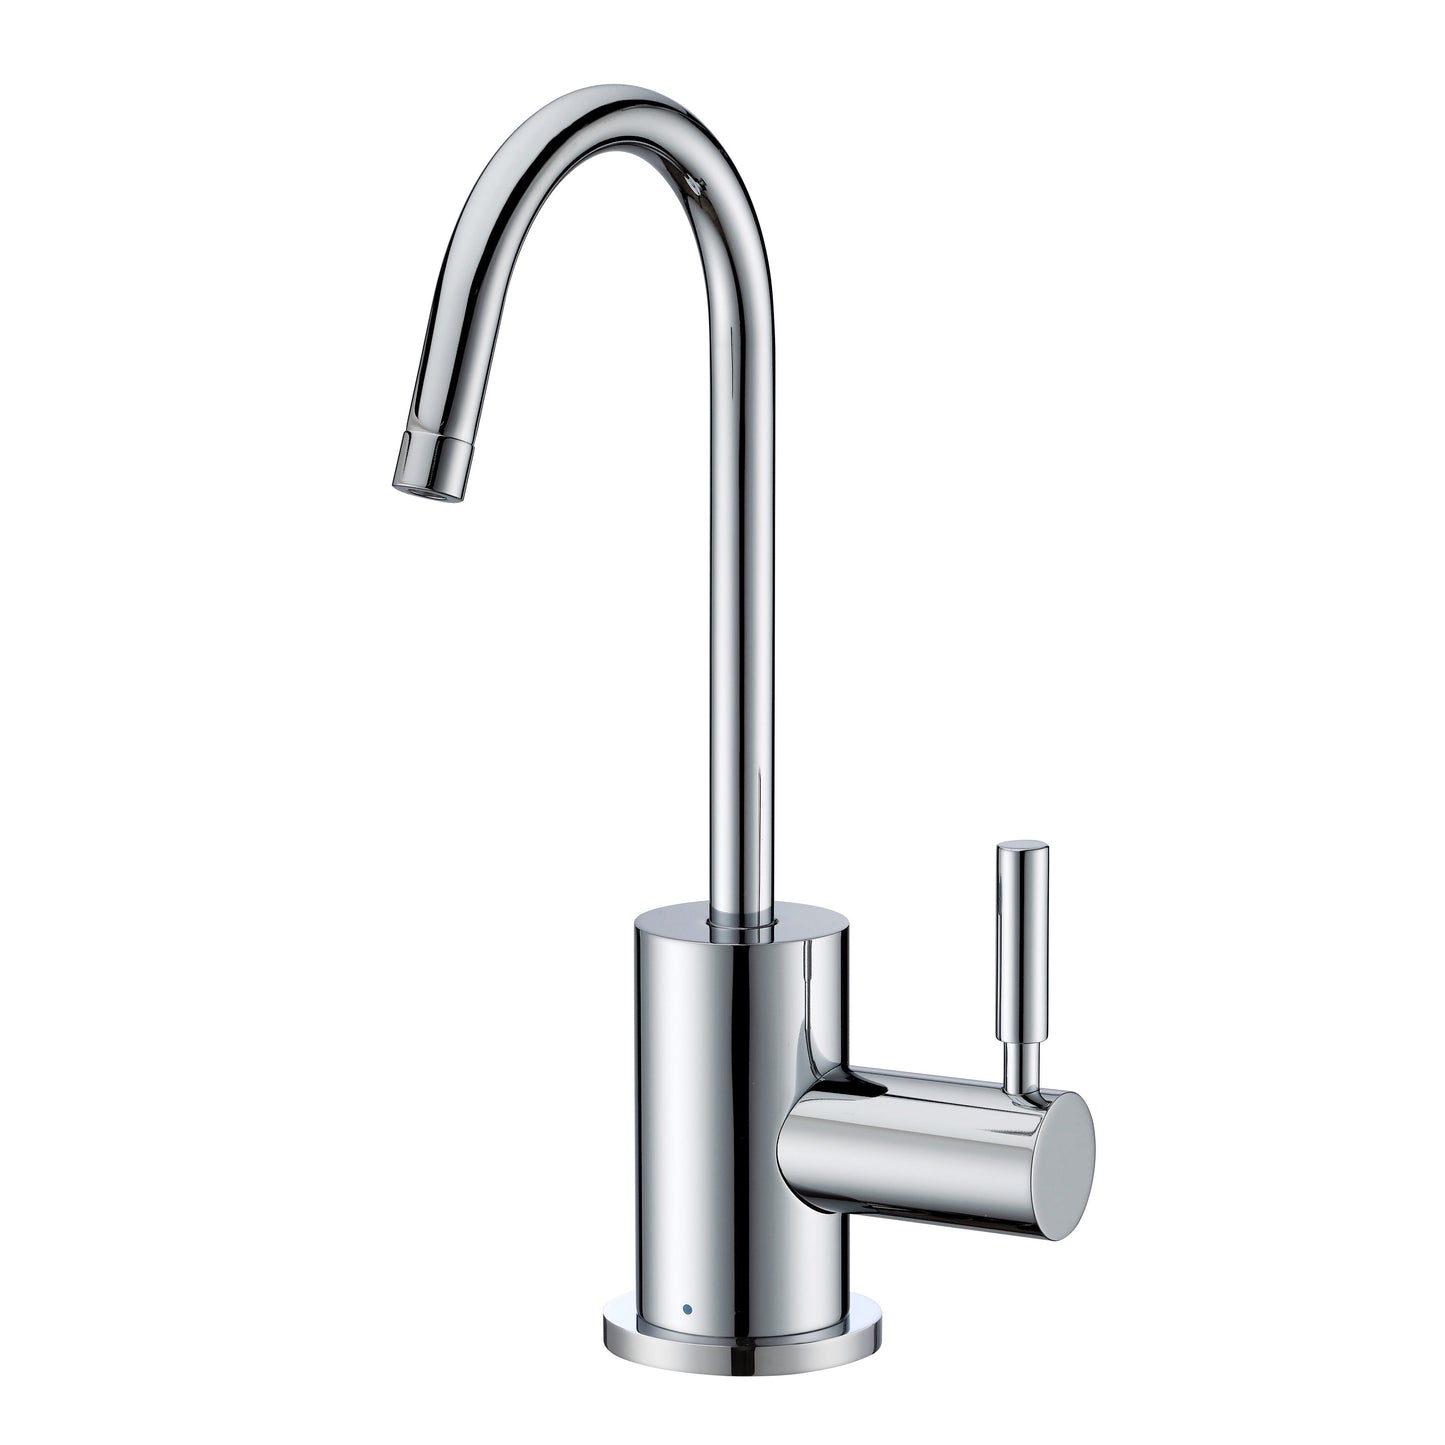 Whitehaus WHFH-C1010-C Point of Use Cold Water Drinking Faucet with Gooseneck Swivel Spout